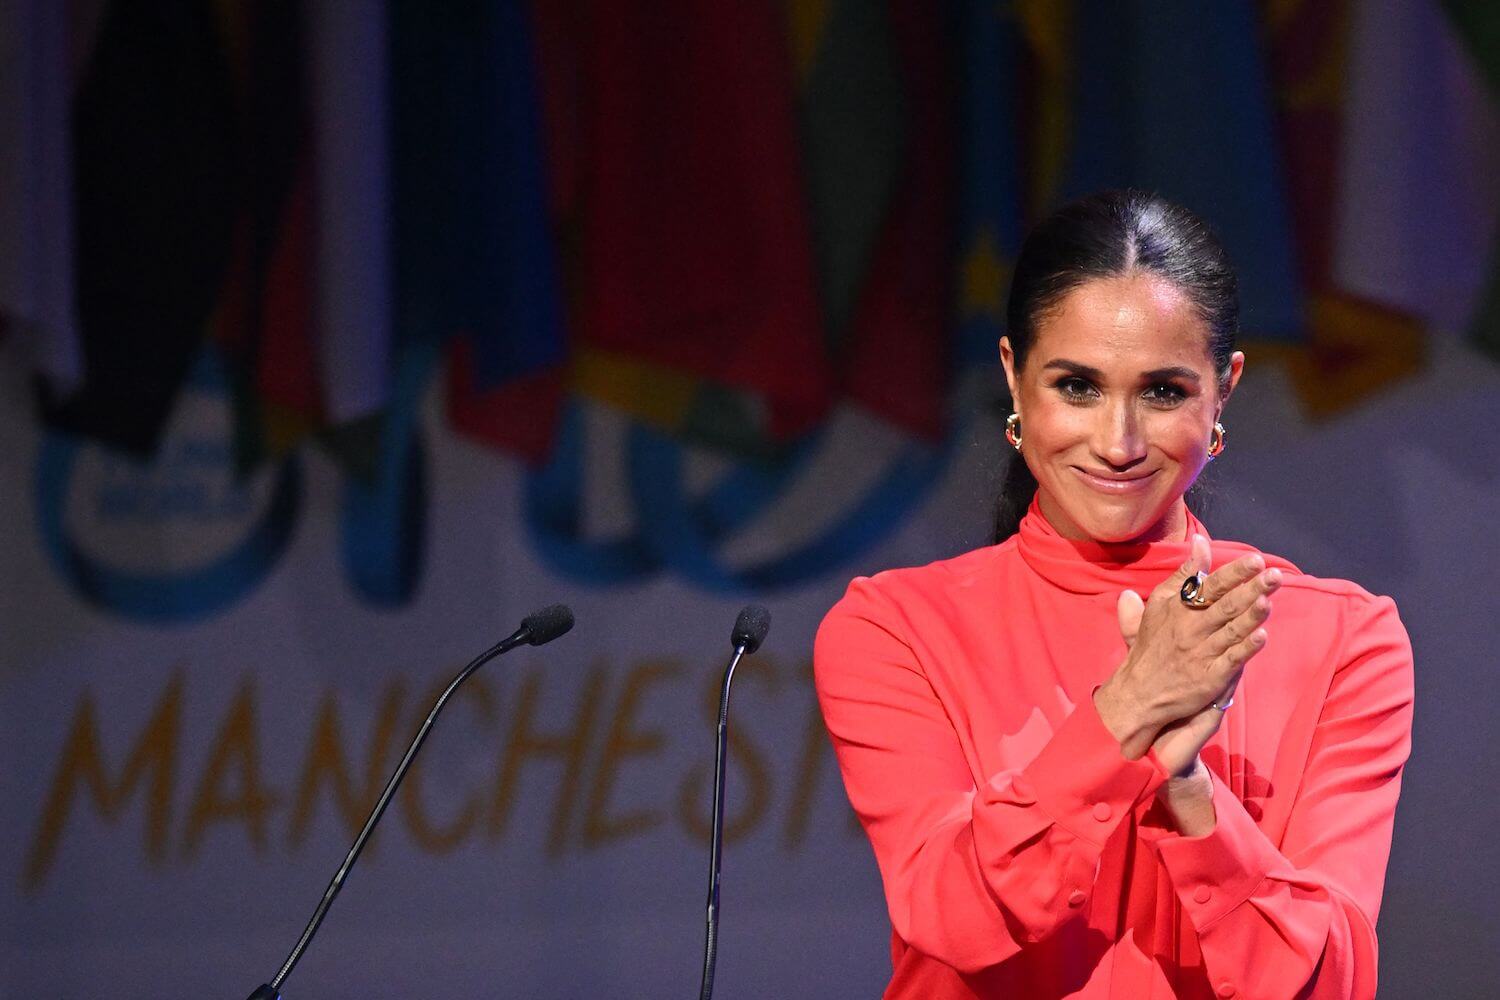 Meghan Markle wasn't regal during her appearance at the One Young World Summit